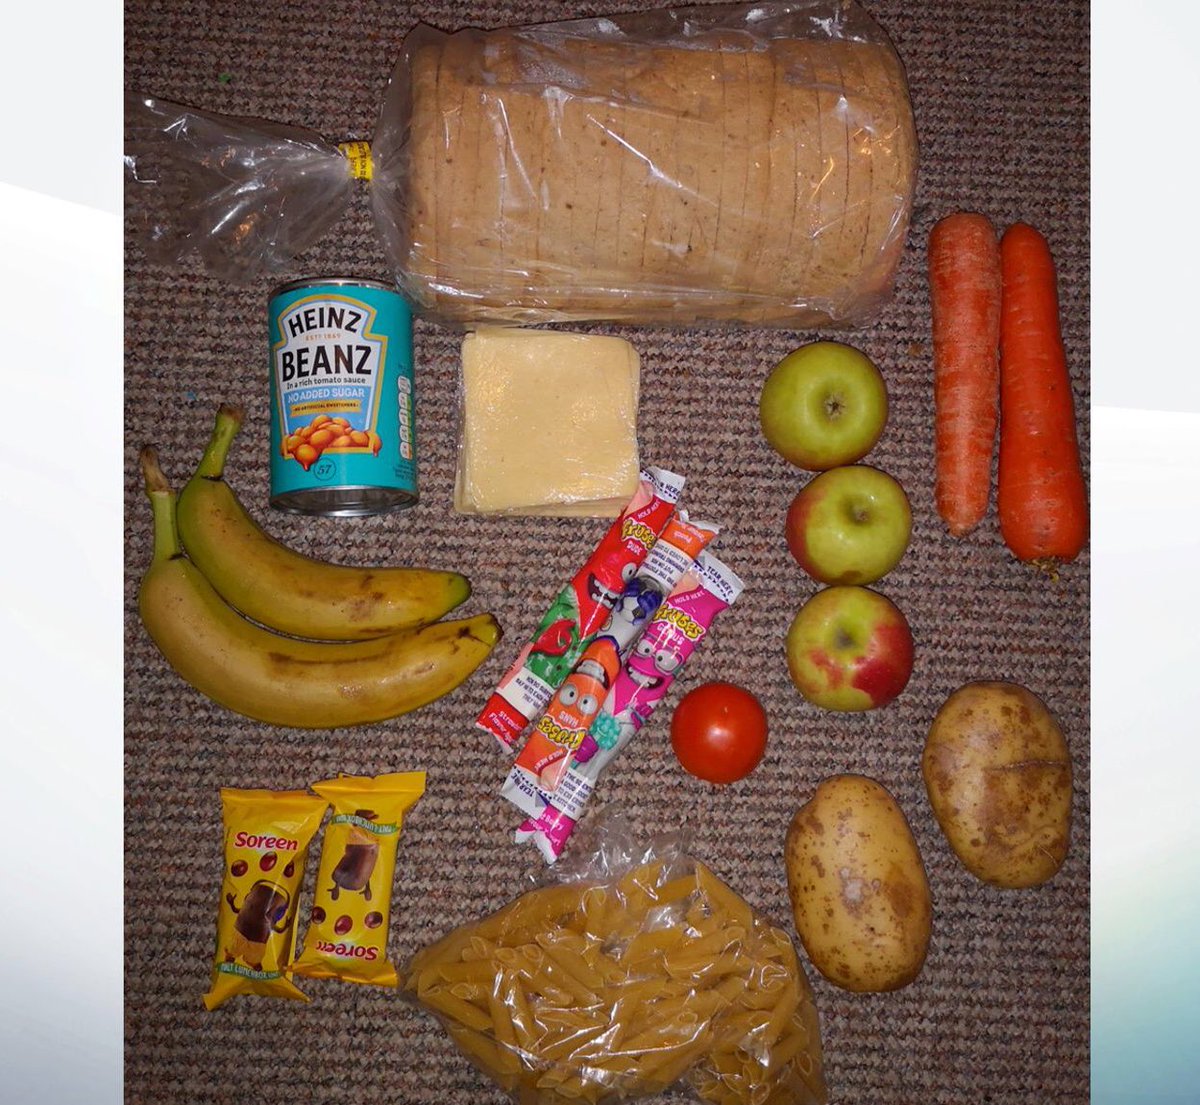 A loaf of bread, a bag of pasta, a can of baked beans, some cheese, 3 apples, 2 carrots, a tomato, 2 baked potatoes, 2 bananas, 2 malt loaf snacks & 3 snack size tubes of fromage frais! That’s it! A disgrace! £5 of food, while a #FSM company bag £30 from govt to provide it!